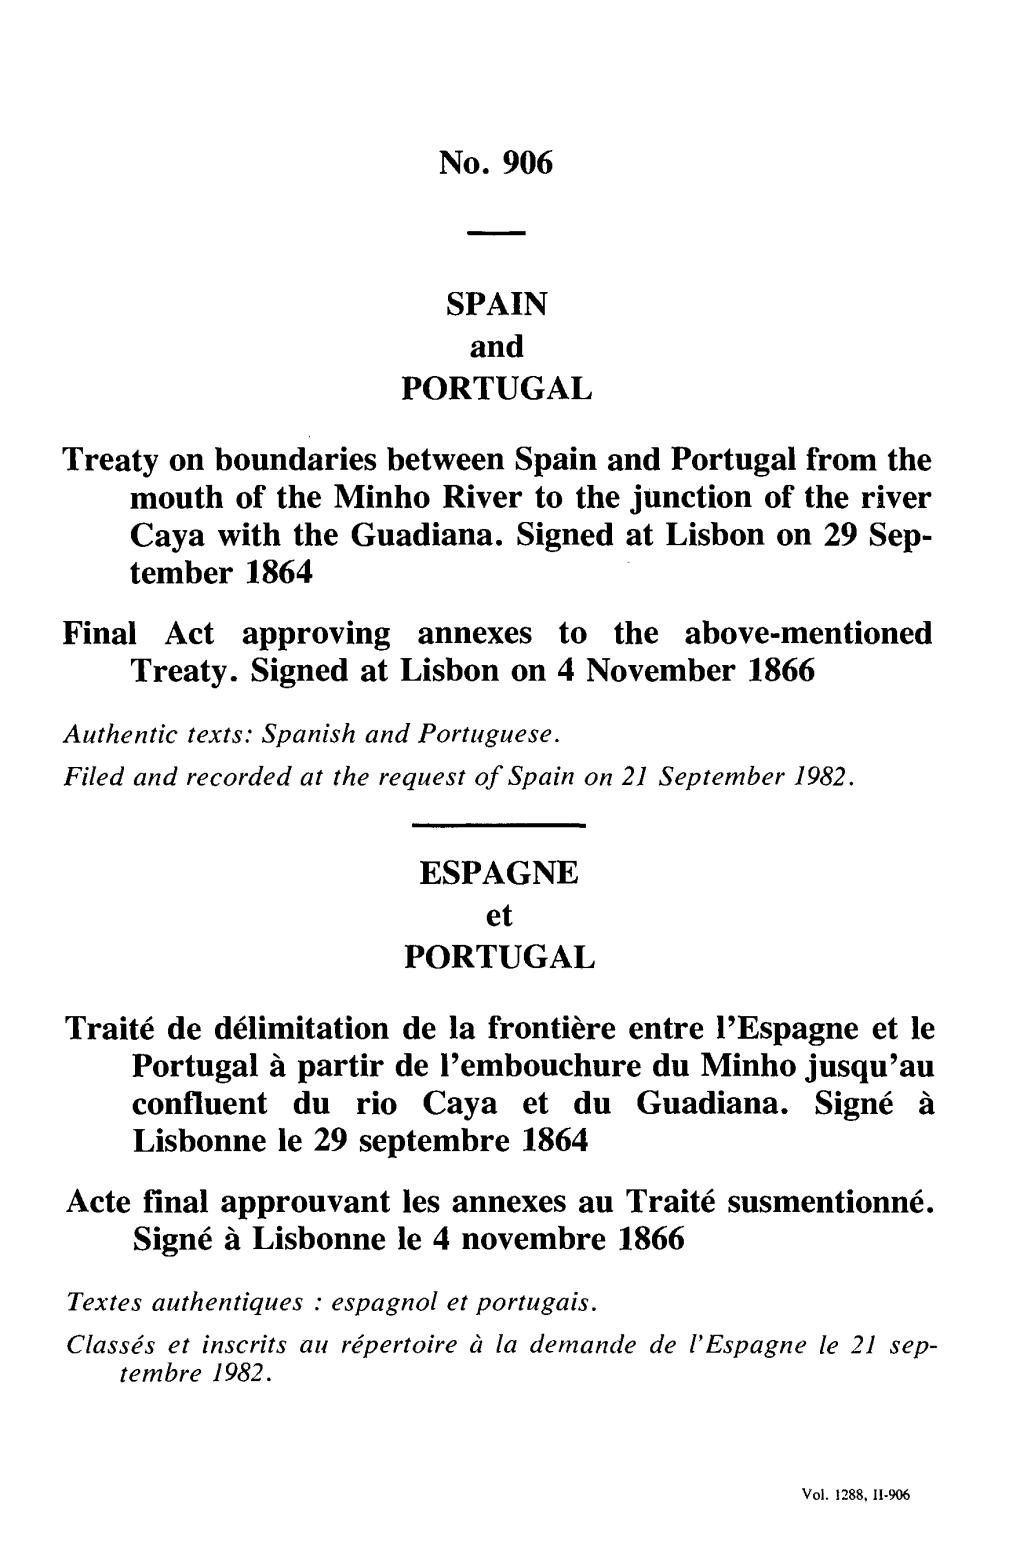 No. 906 SPAIN and PORTUGAL Treaty on Boundaries Between